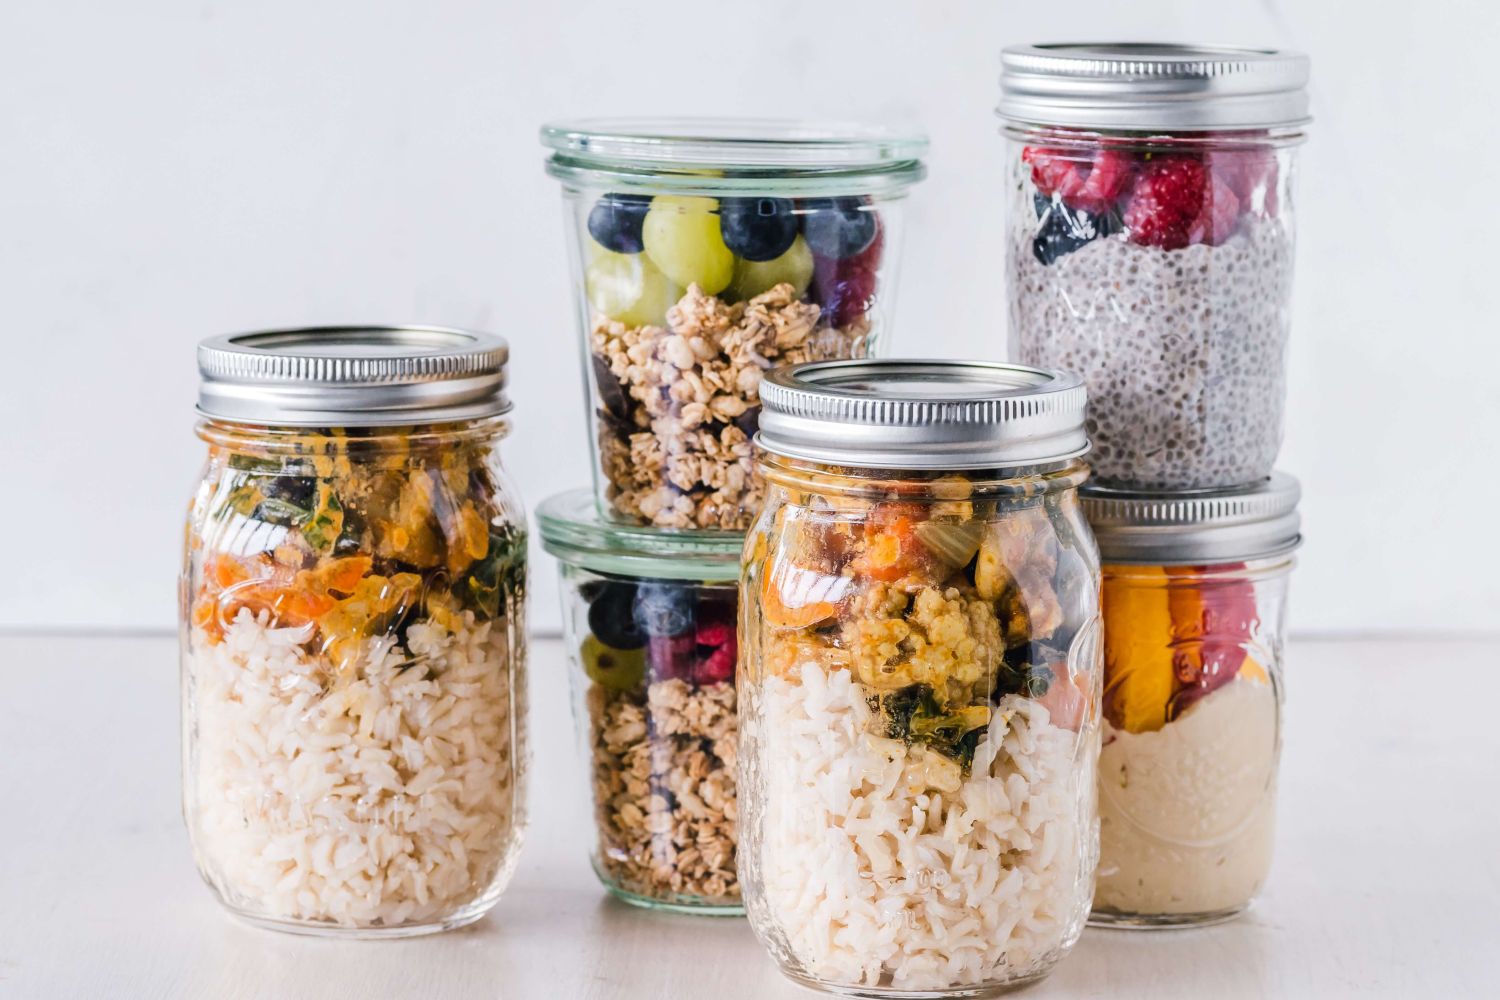 Healthy meal planning jars with salad, granola, hummus, brown rice, and ground chicken.